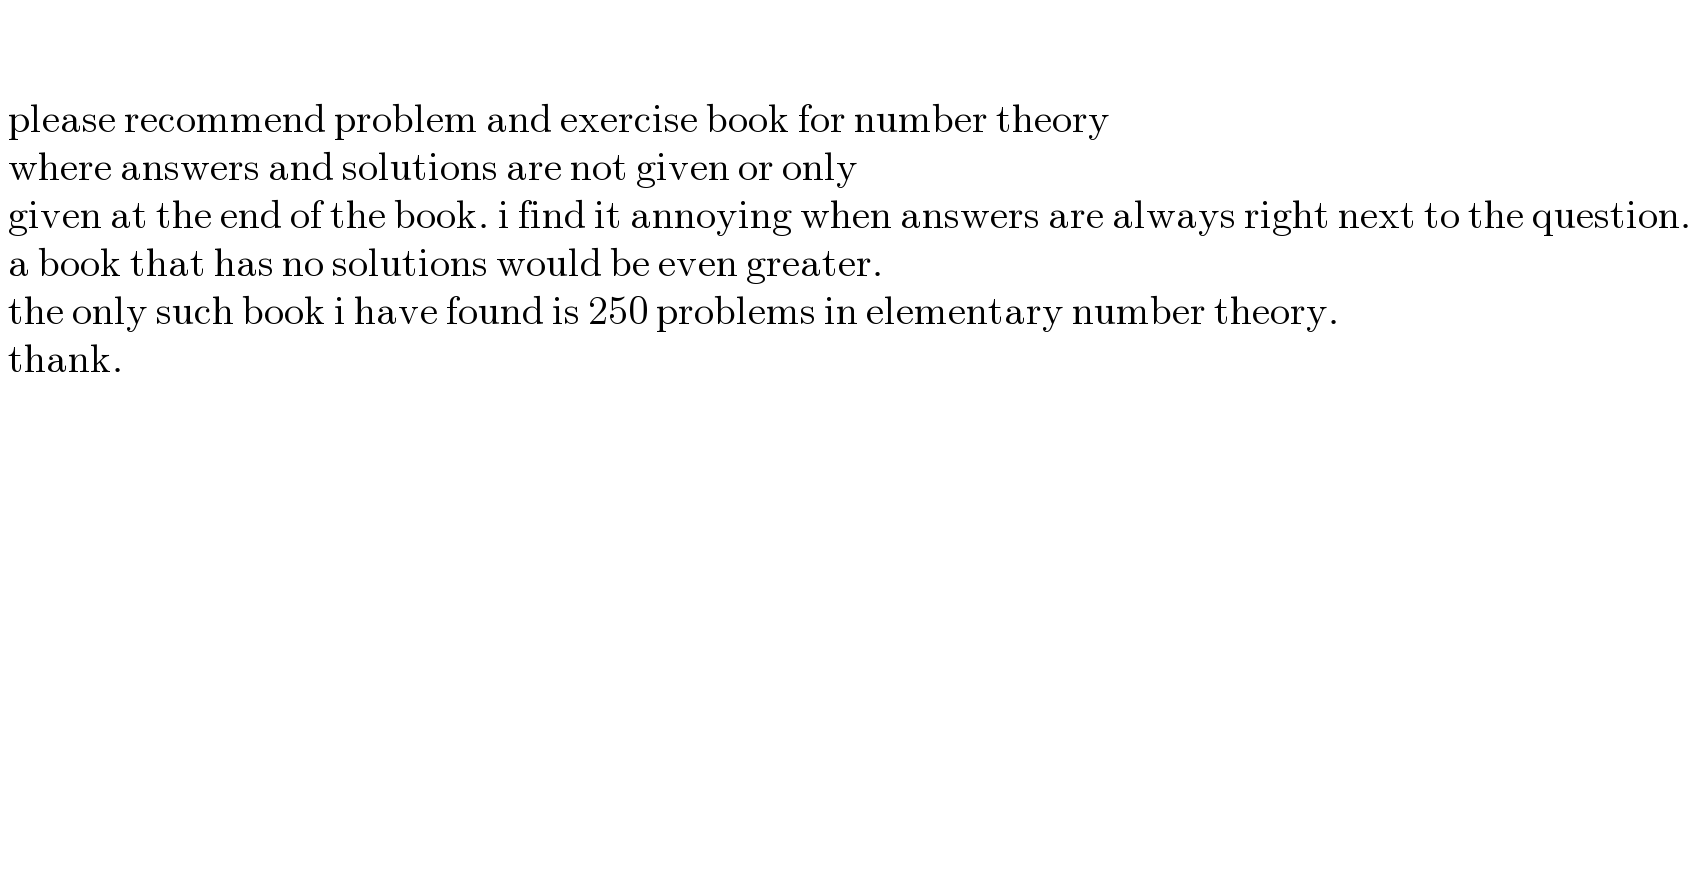        please recommend problem and exercise book for number theory    where answers and solutions are not given or only   given at the end of the book. i find it annoying when answers are always right next to the question.   a book that has no solutions would be even greater.   the only such book i have found is 250 problems in elementary number theory.   thank.        